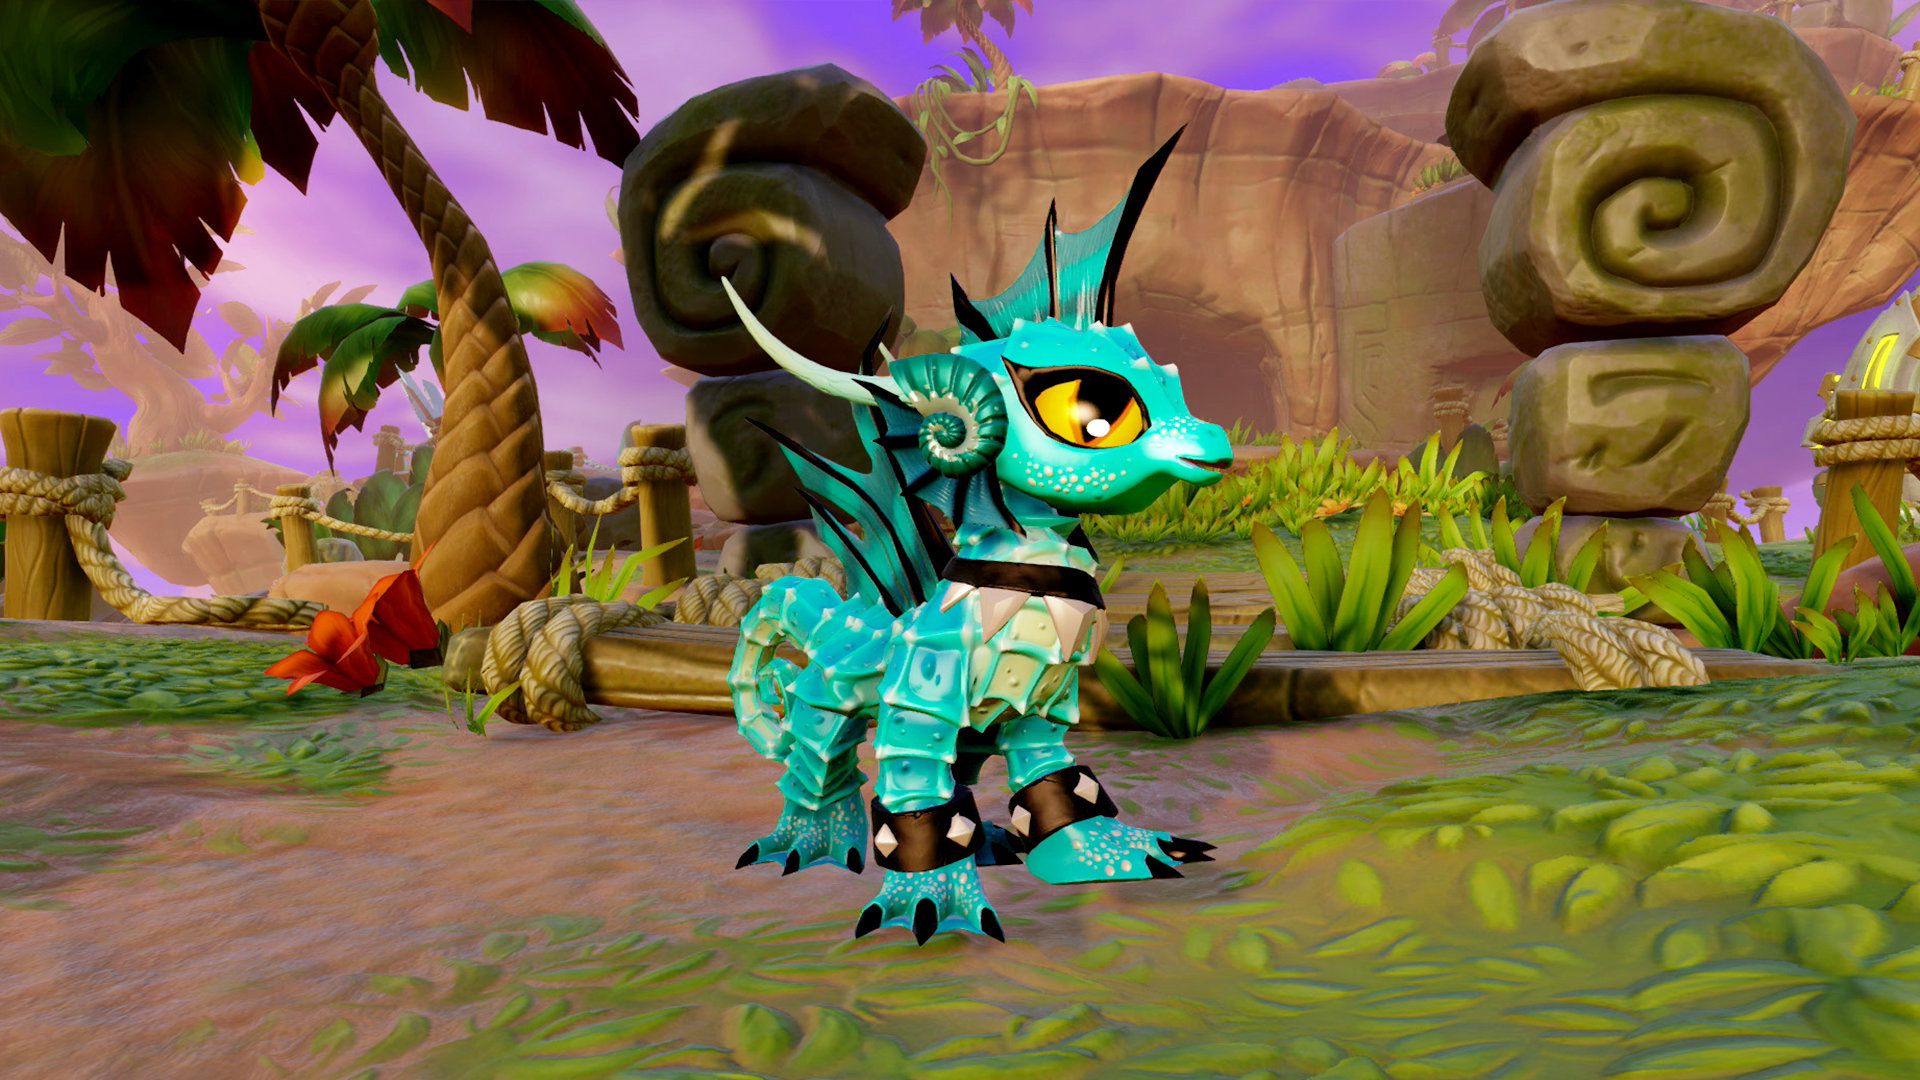 On Skylanders Trap Team I was responsible for the the creation of a Skyland...